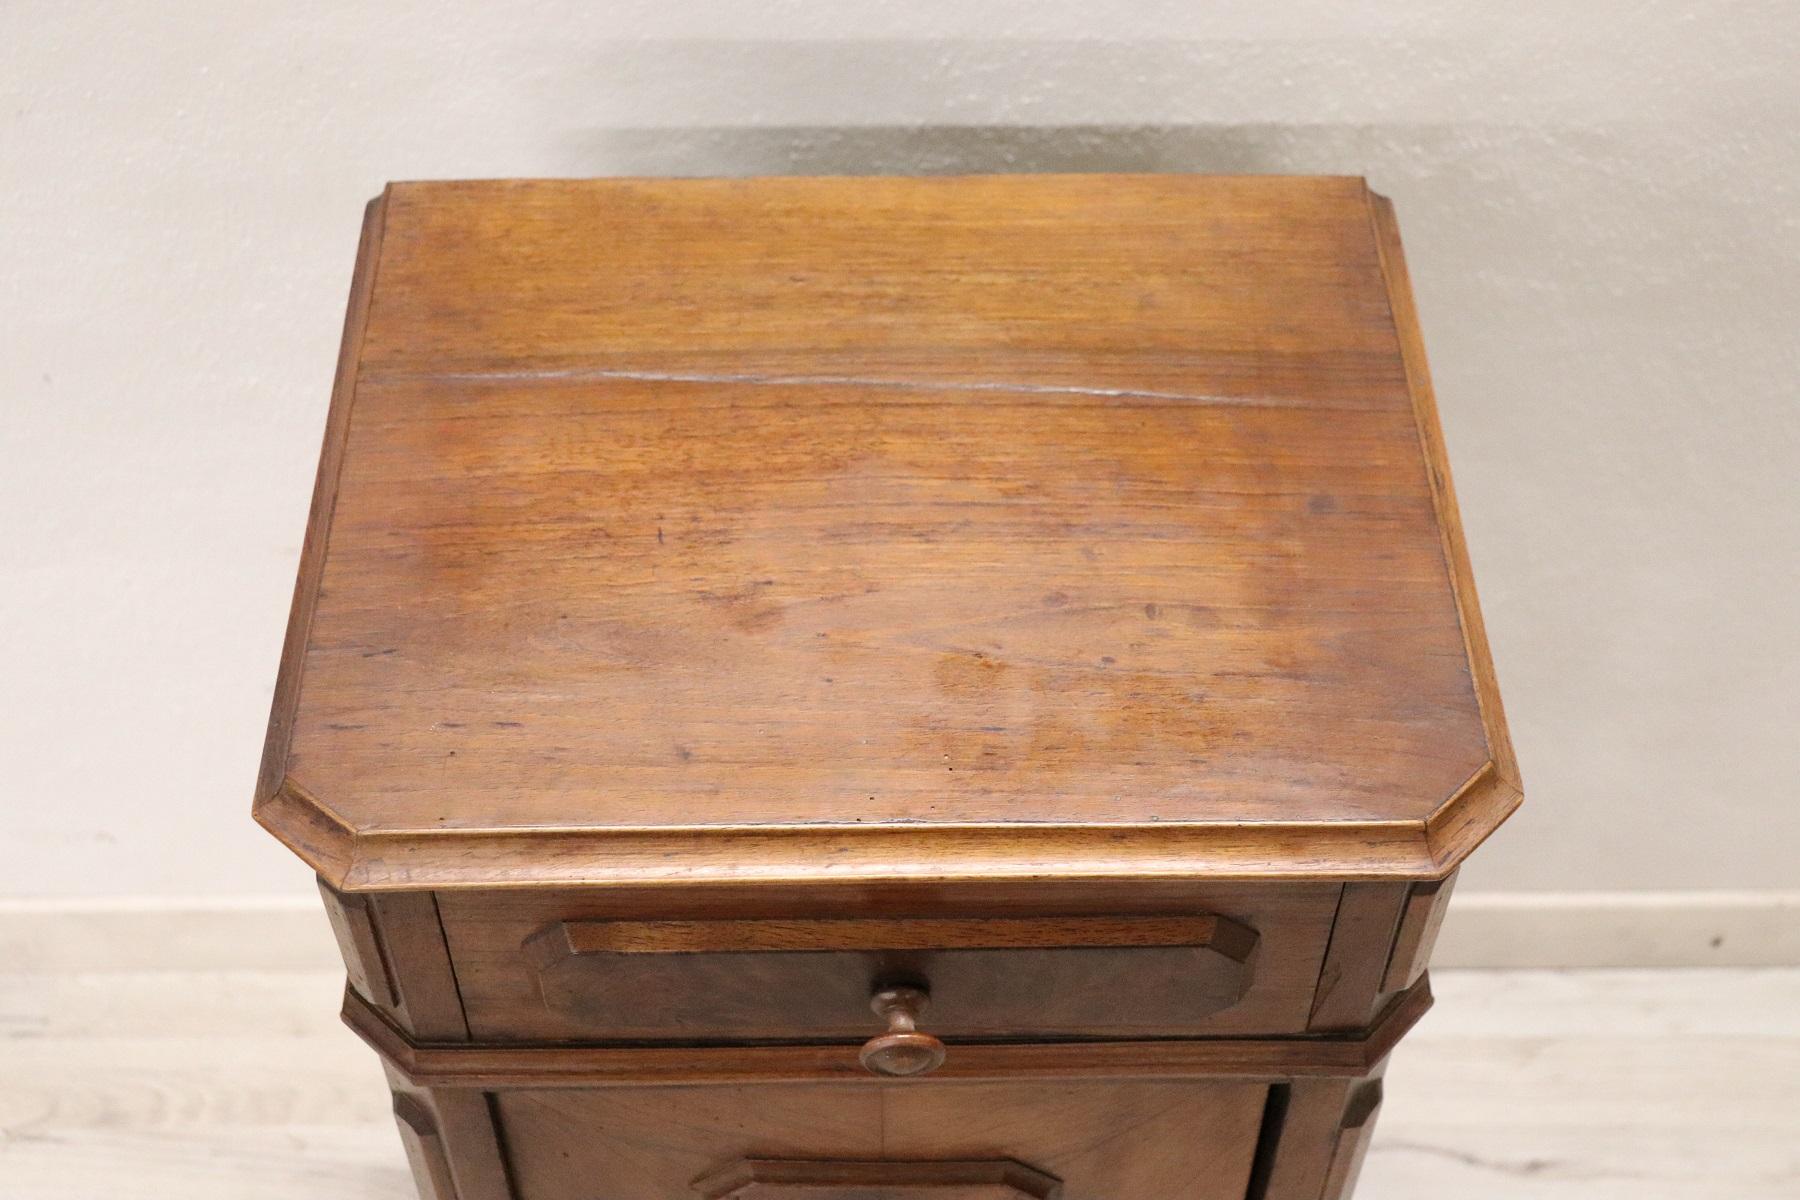 Rare and fine quality Italian antique nightstand. Made of fine linear and simple solid walnut wood with precious briar on the front. One comfortable drawer. The wood has a beautiful antique patina. Used, good condition.
      